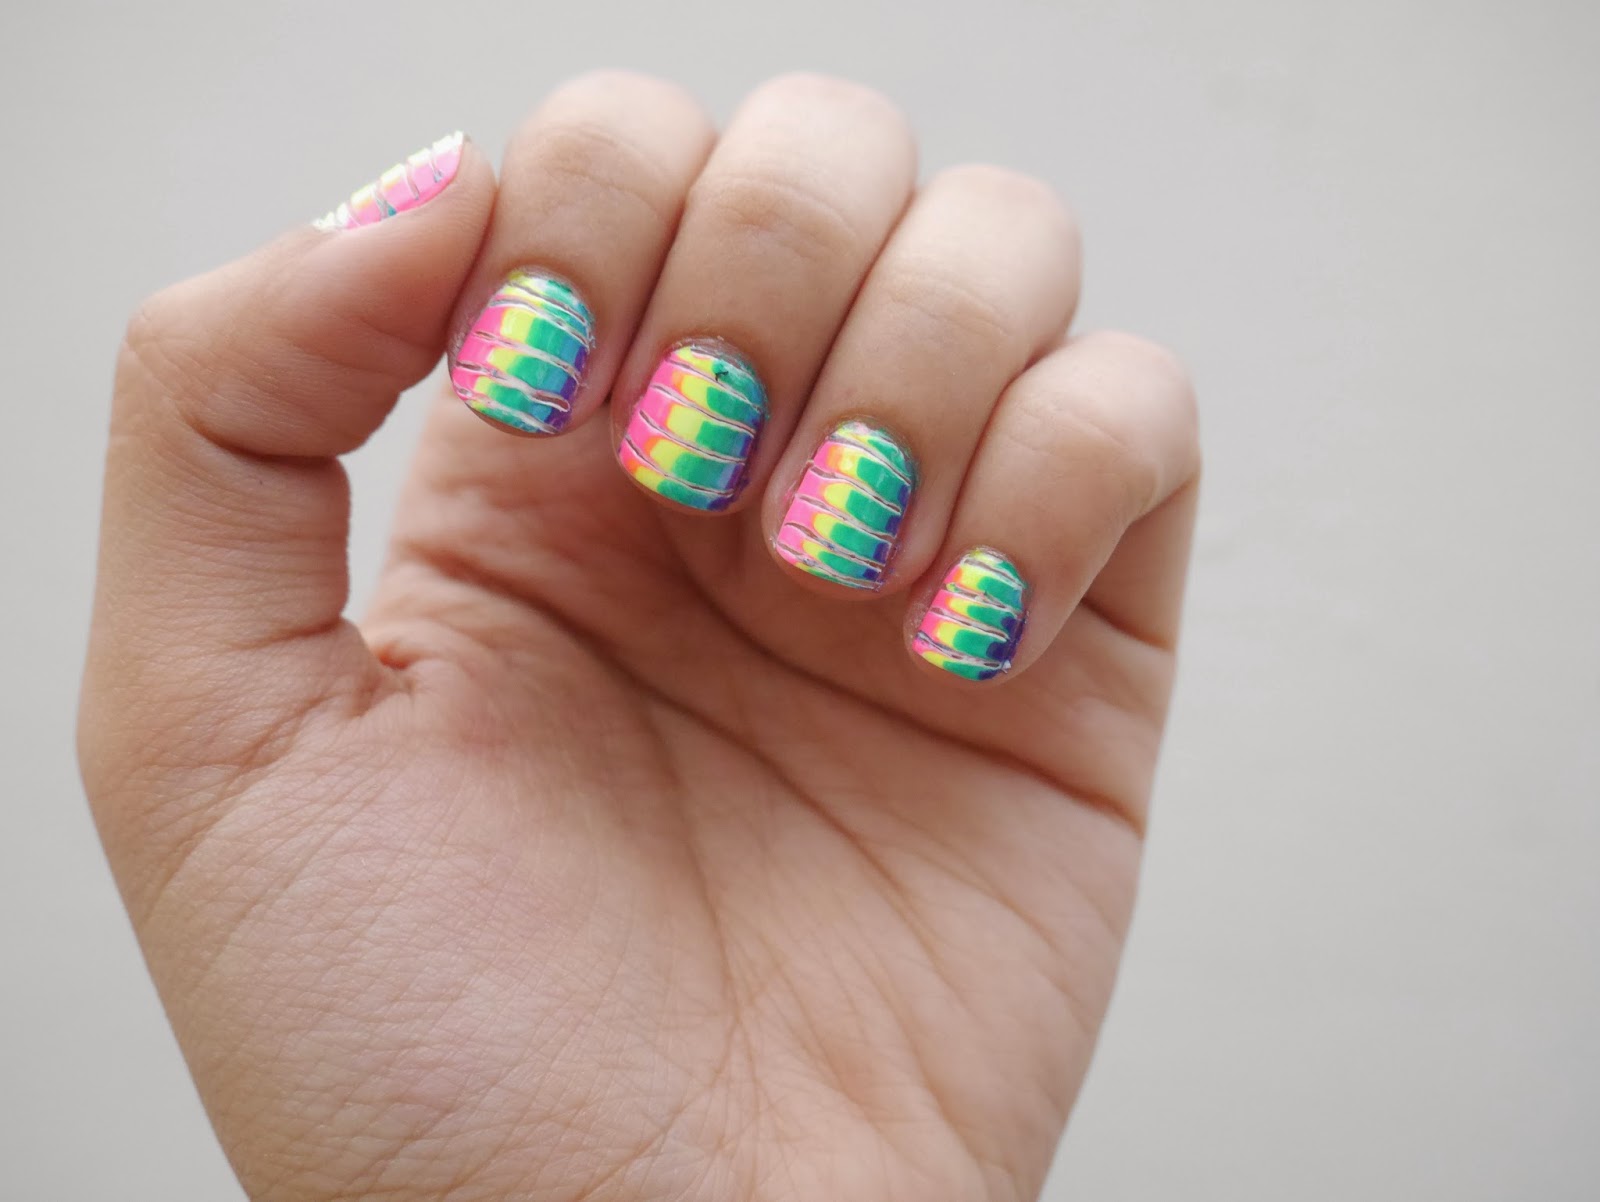 7. Gel Polish Tie Dye Nails Without Water - wide 4